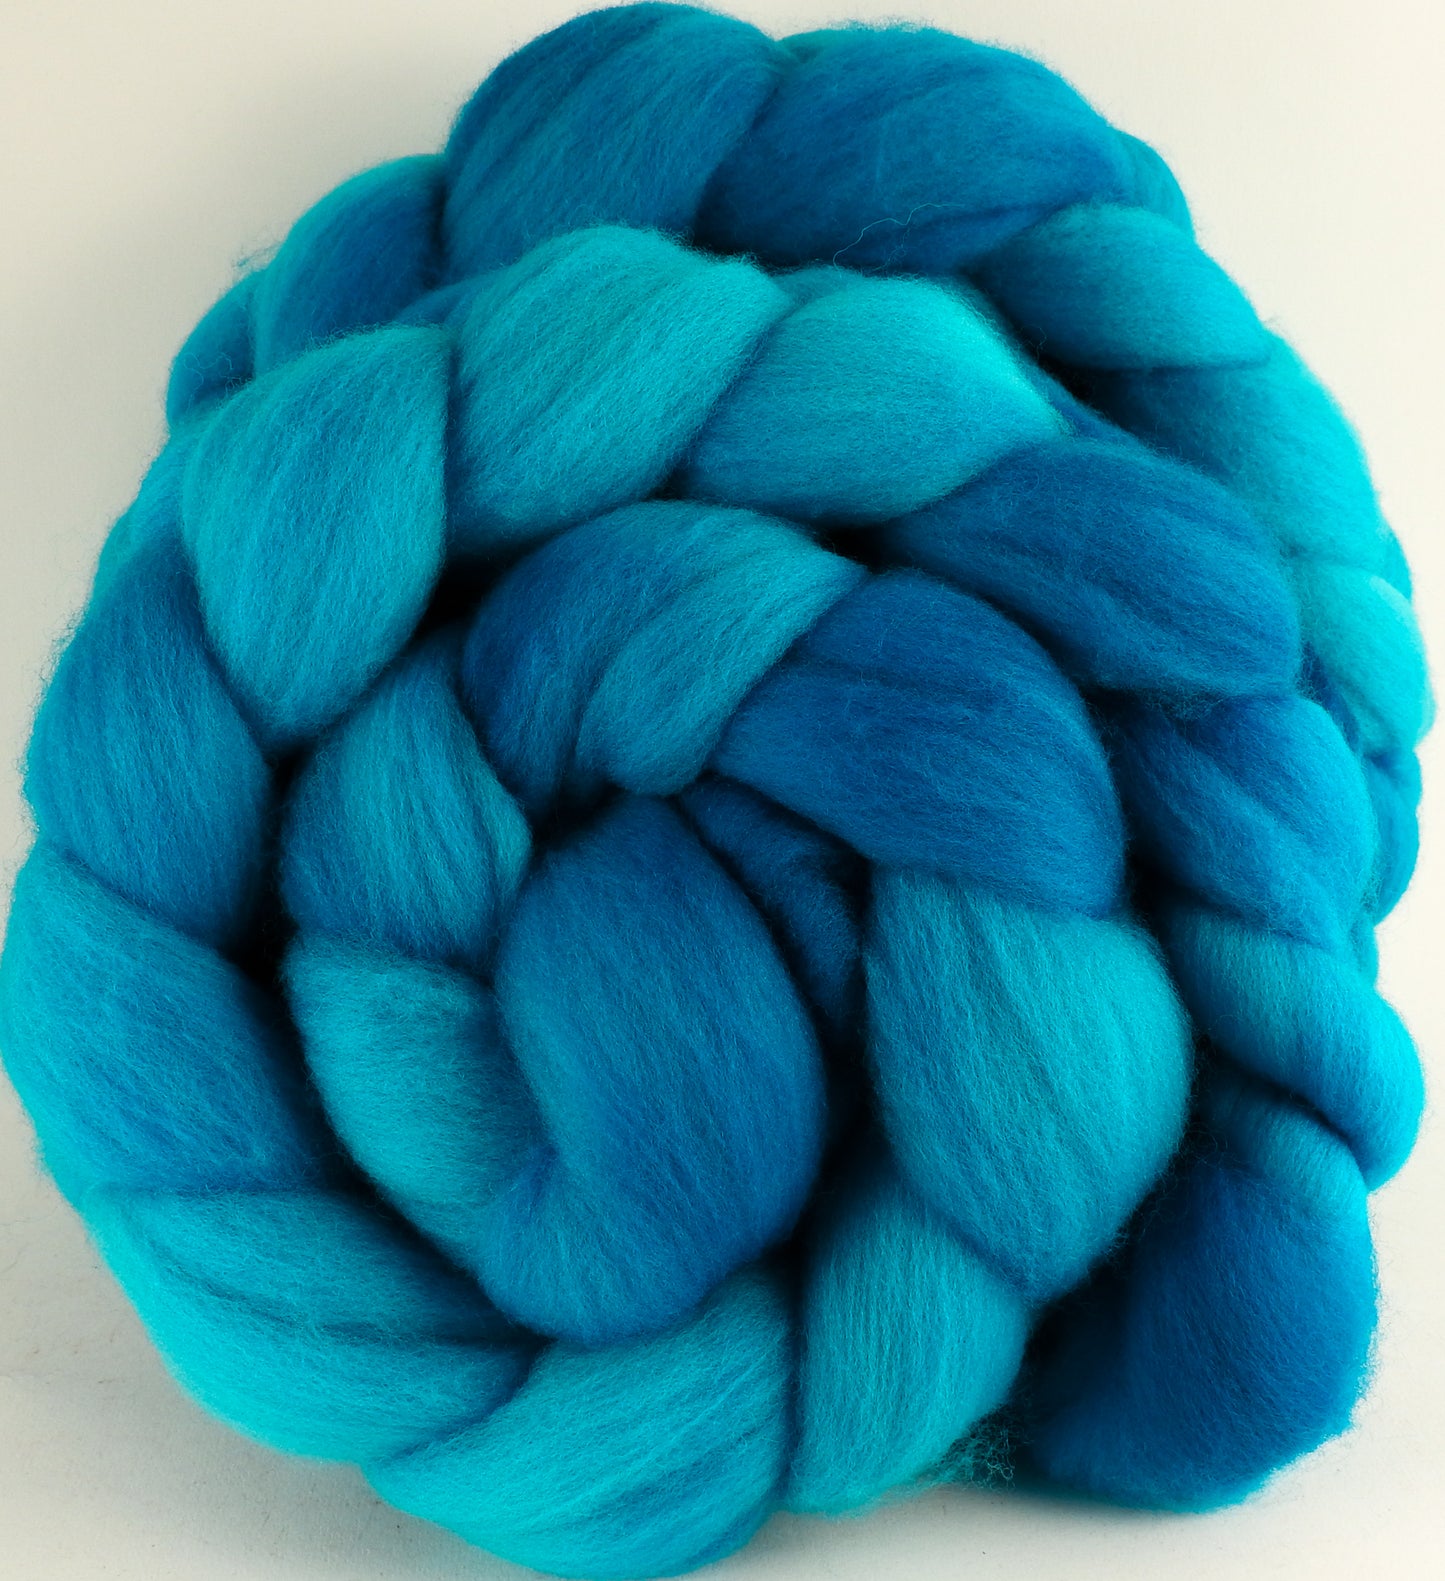 Hand dyed top for spinning - Jersey (5.2) - Organic Polwarth - Inglenook Fibers